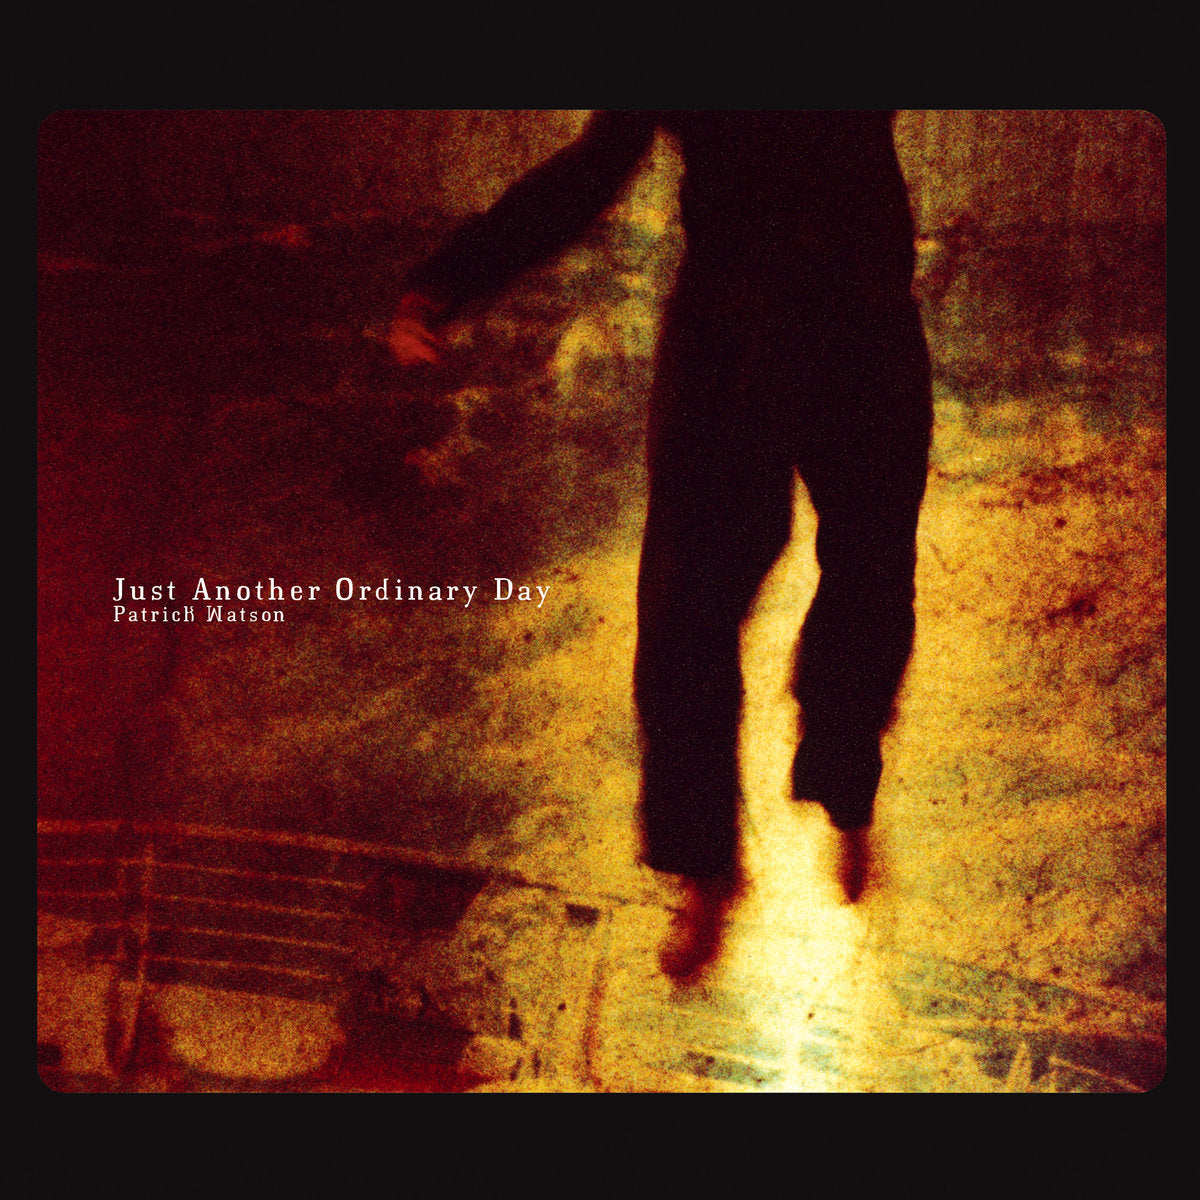 Patrick Watson - Just Another Ordinary Day (Vinyl 2LP)